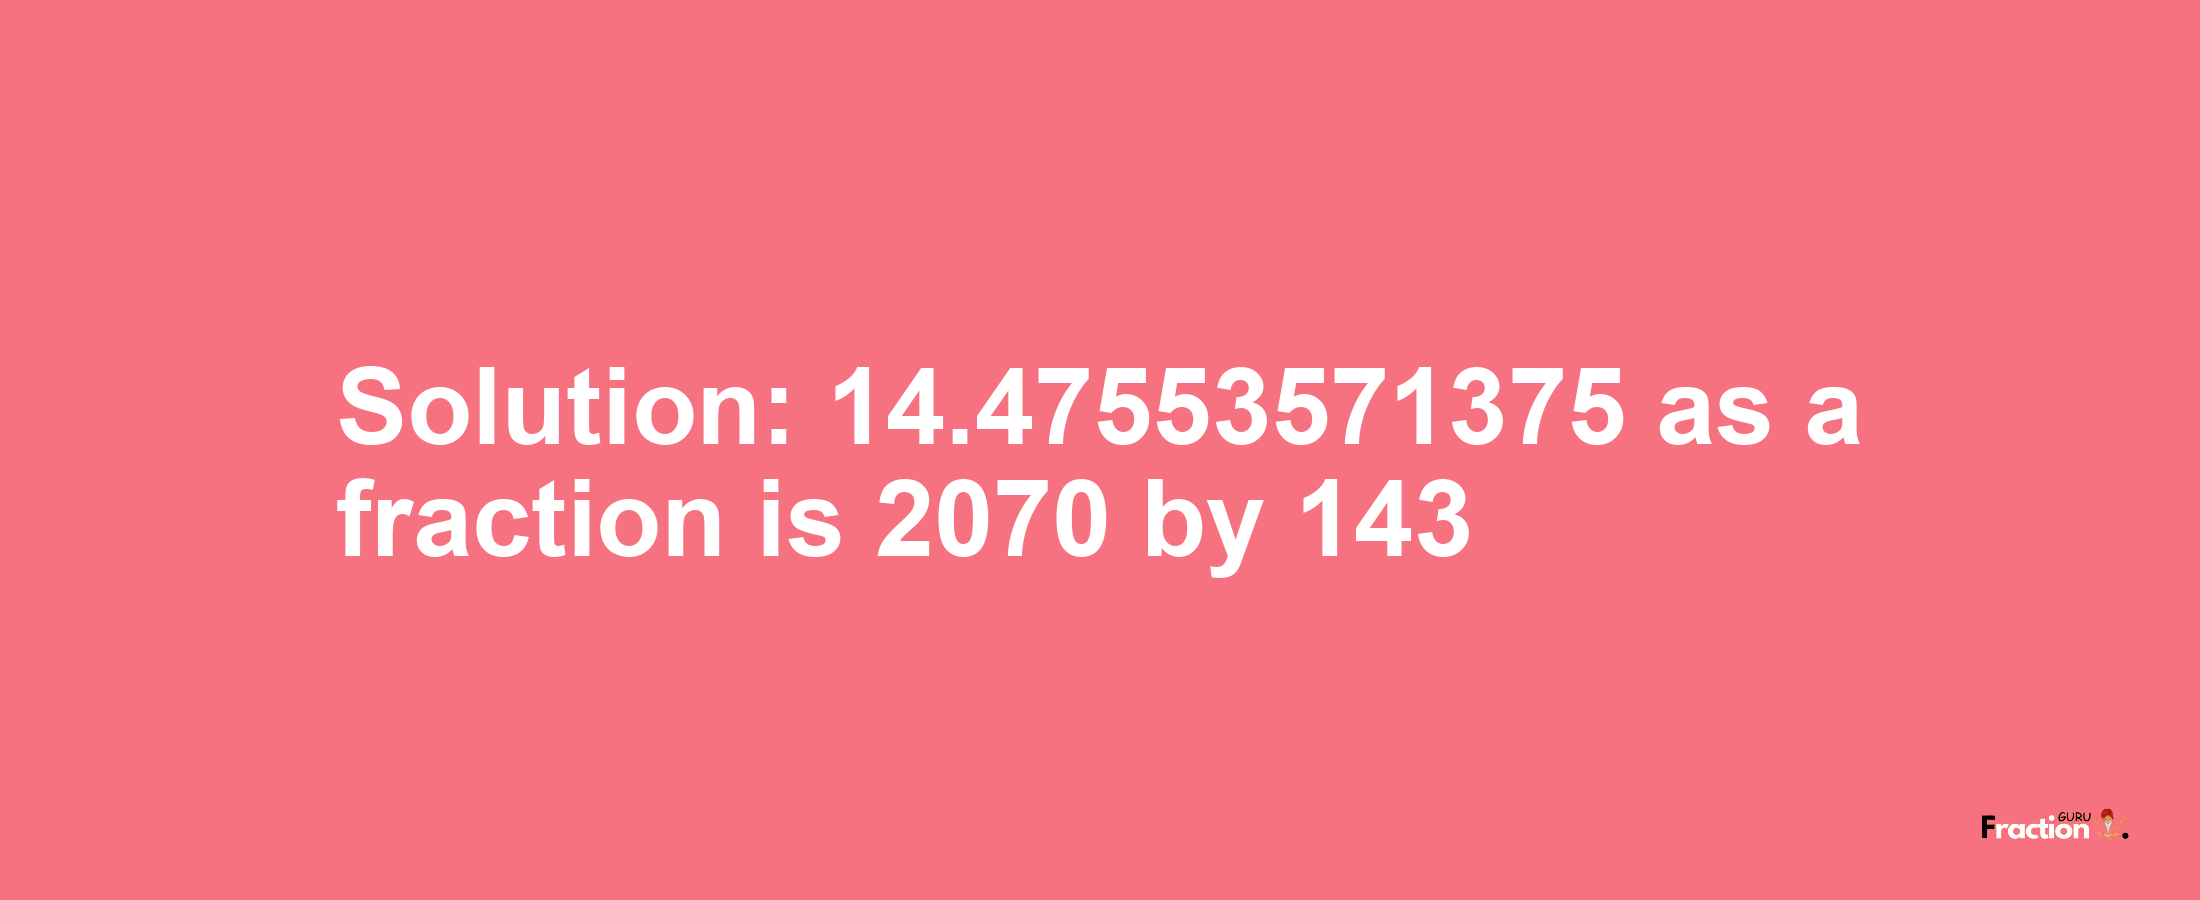 Solution:14.47553571375 as a fraction is 2070/143